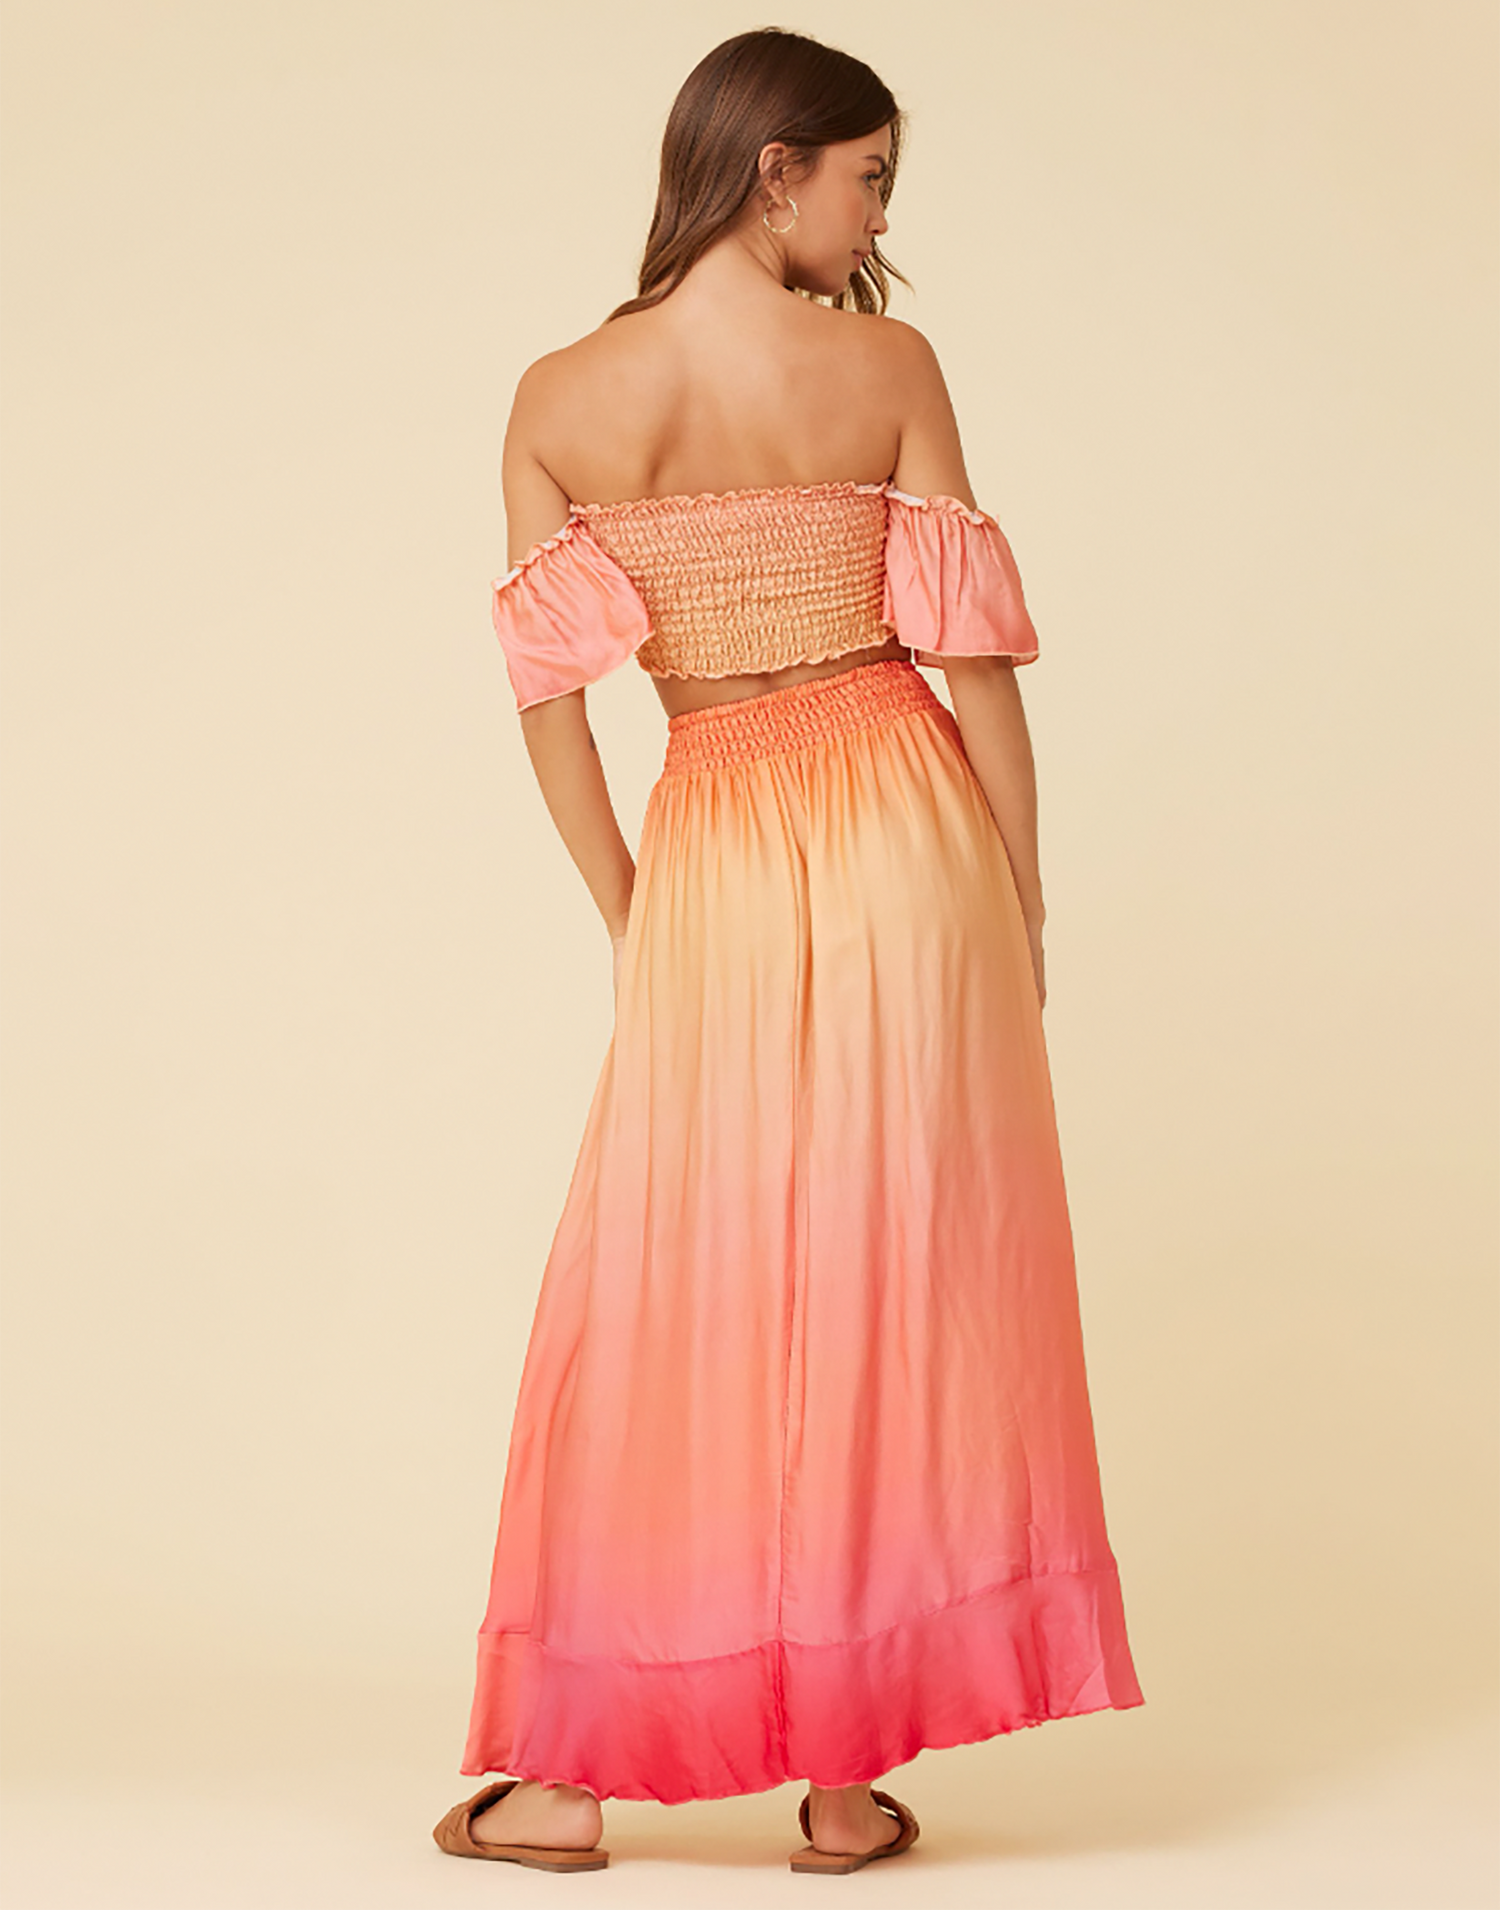 Dip Dye Tie Front Top by Surf Gypsy in Sunset Ombre - Back View